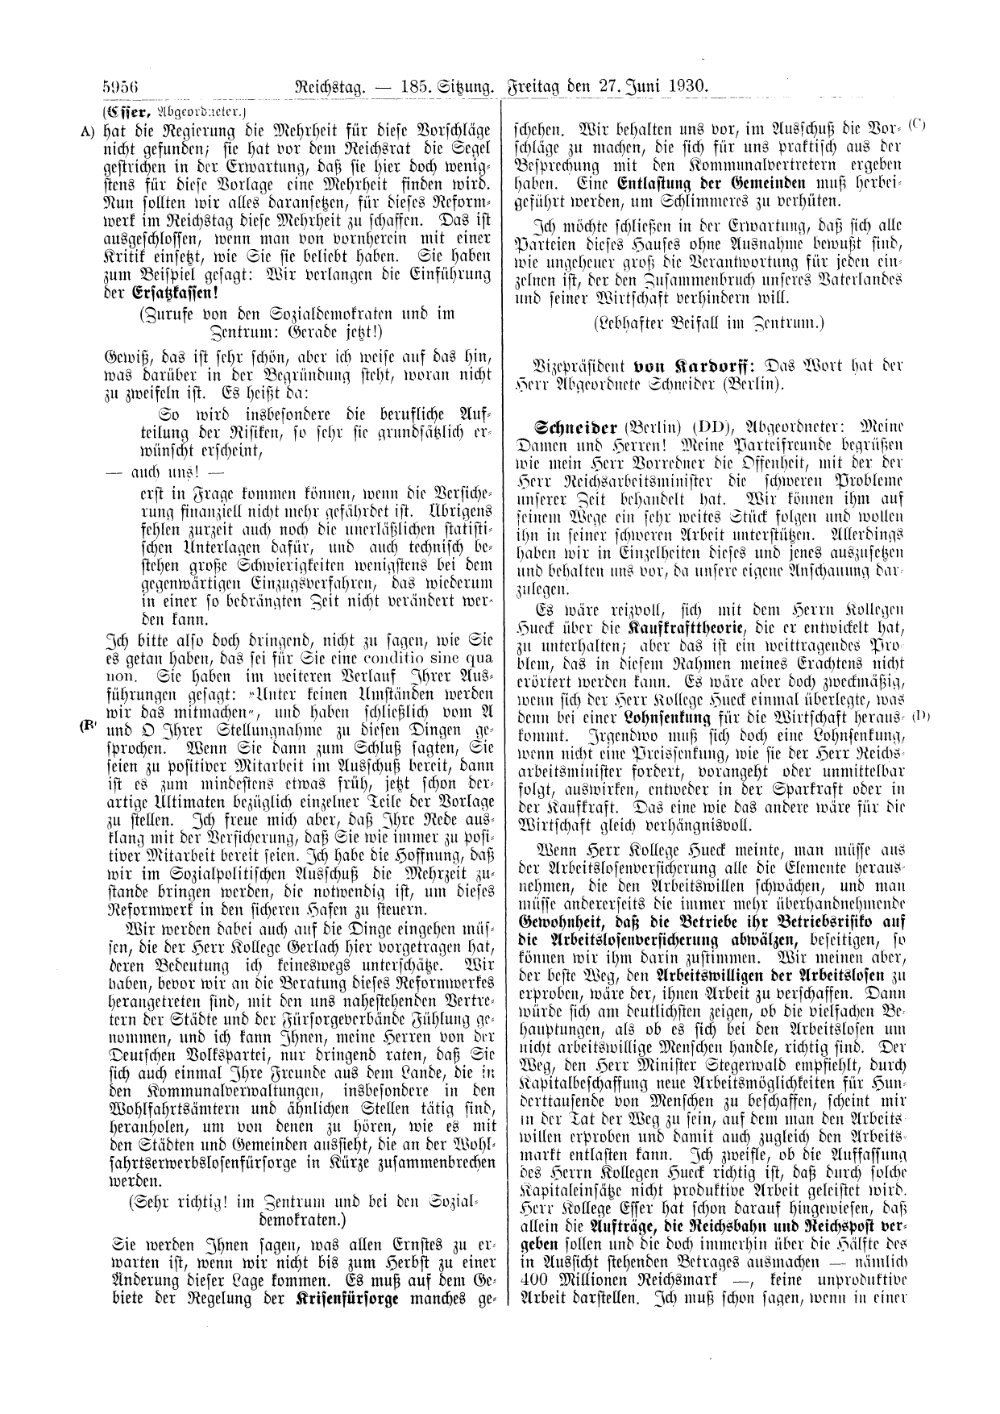 Scan of page 5956